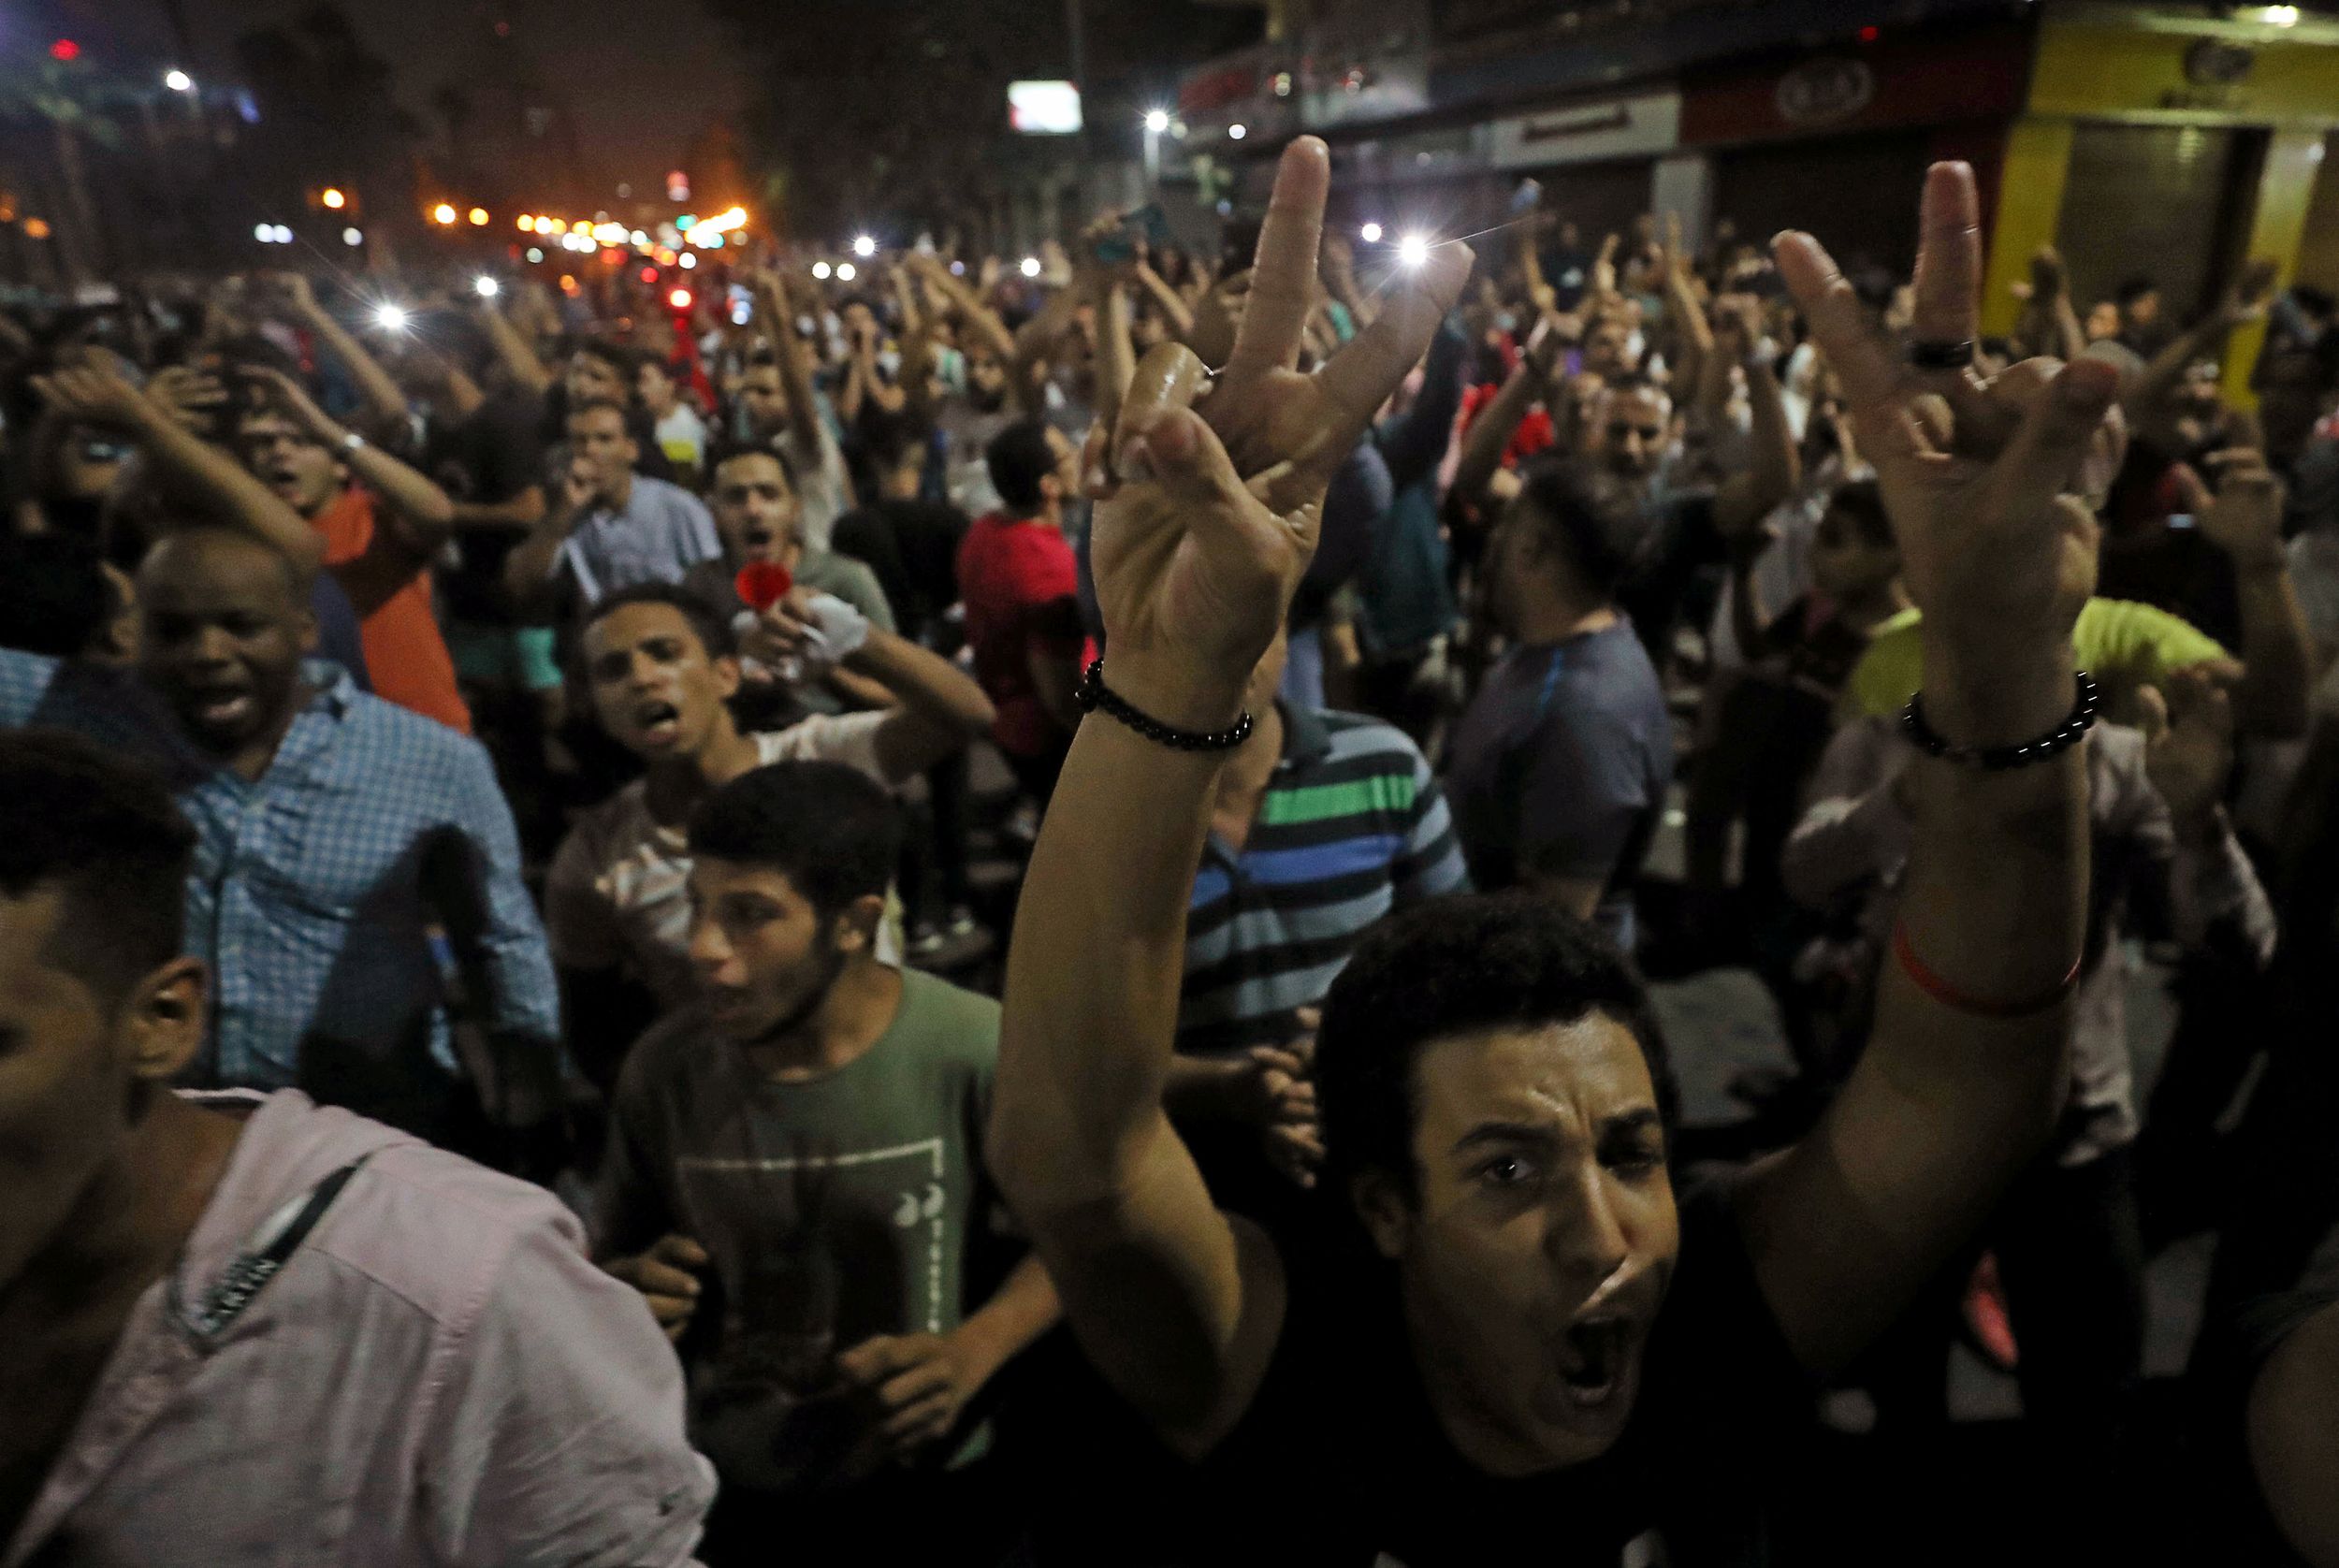 What We're Watching: Another Egyptian Uprising?